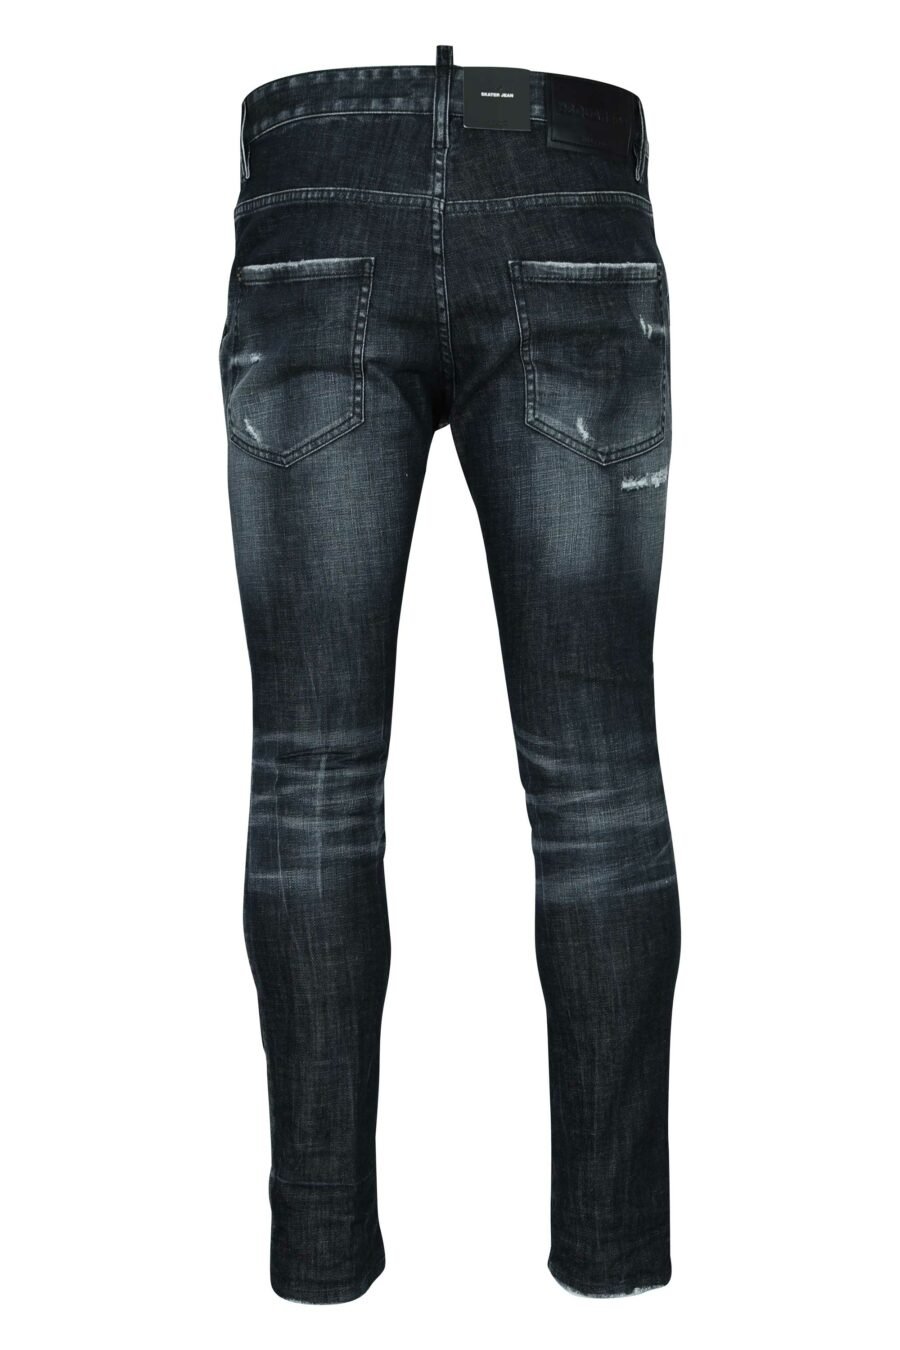 Black "skater jean" jeans with patch and semi-worn - 8054148522018 1